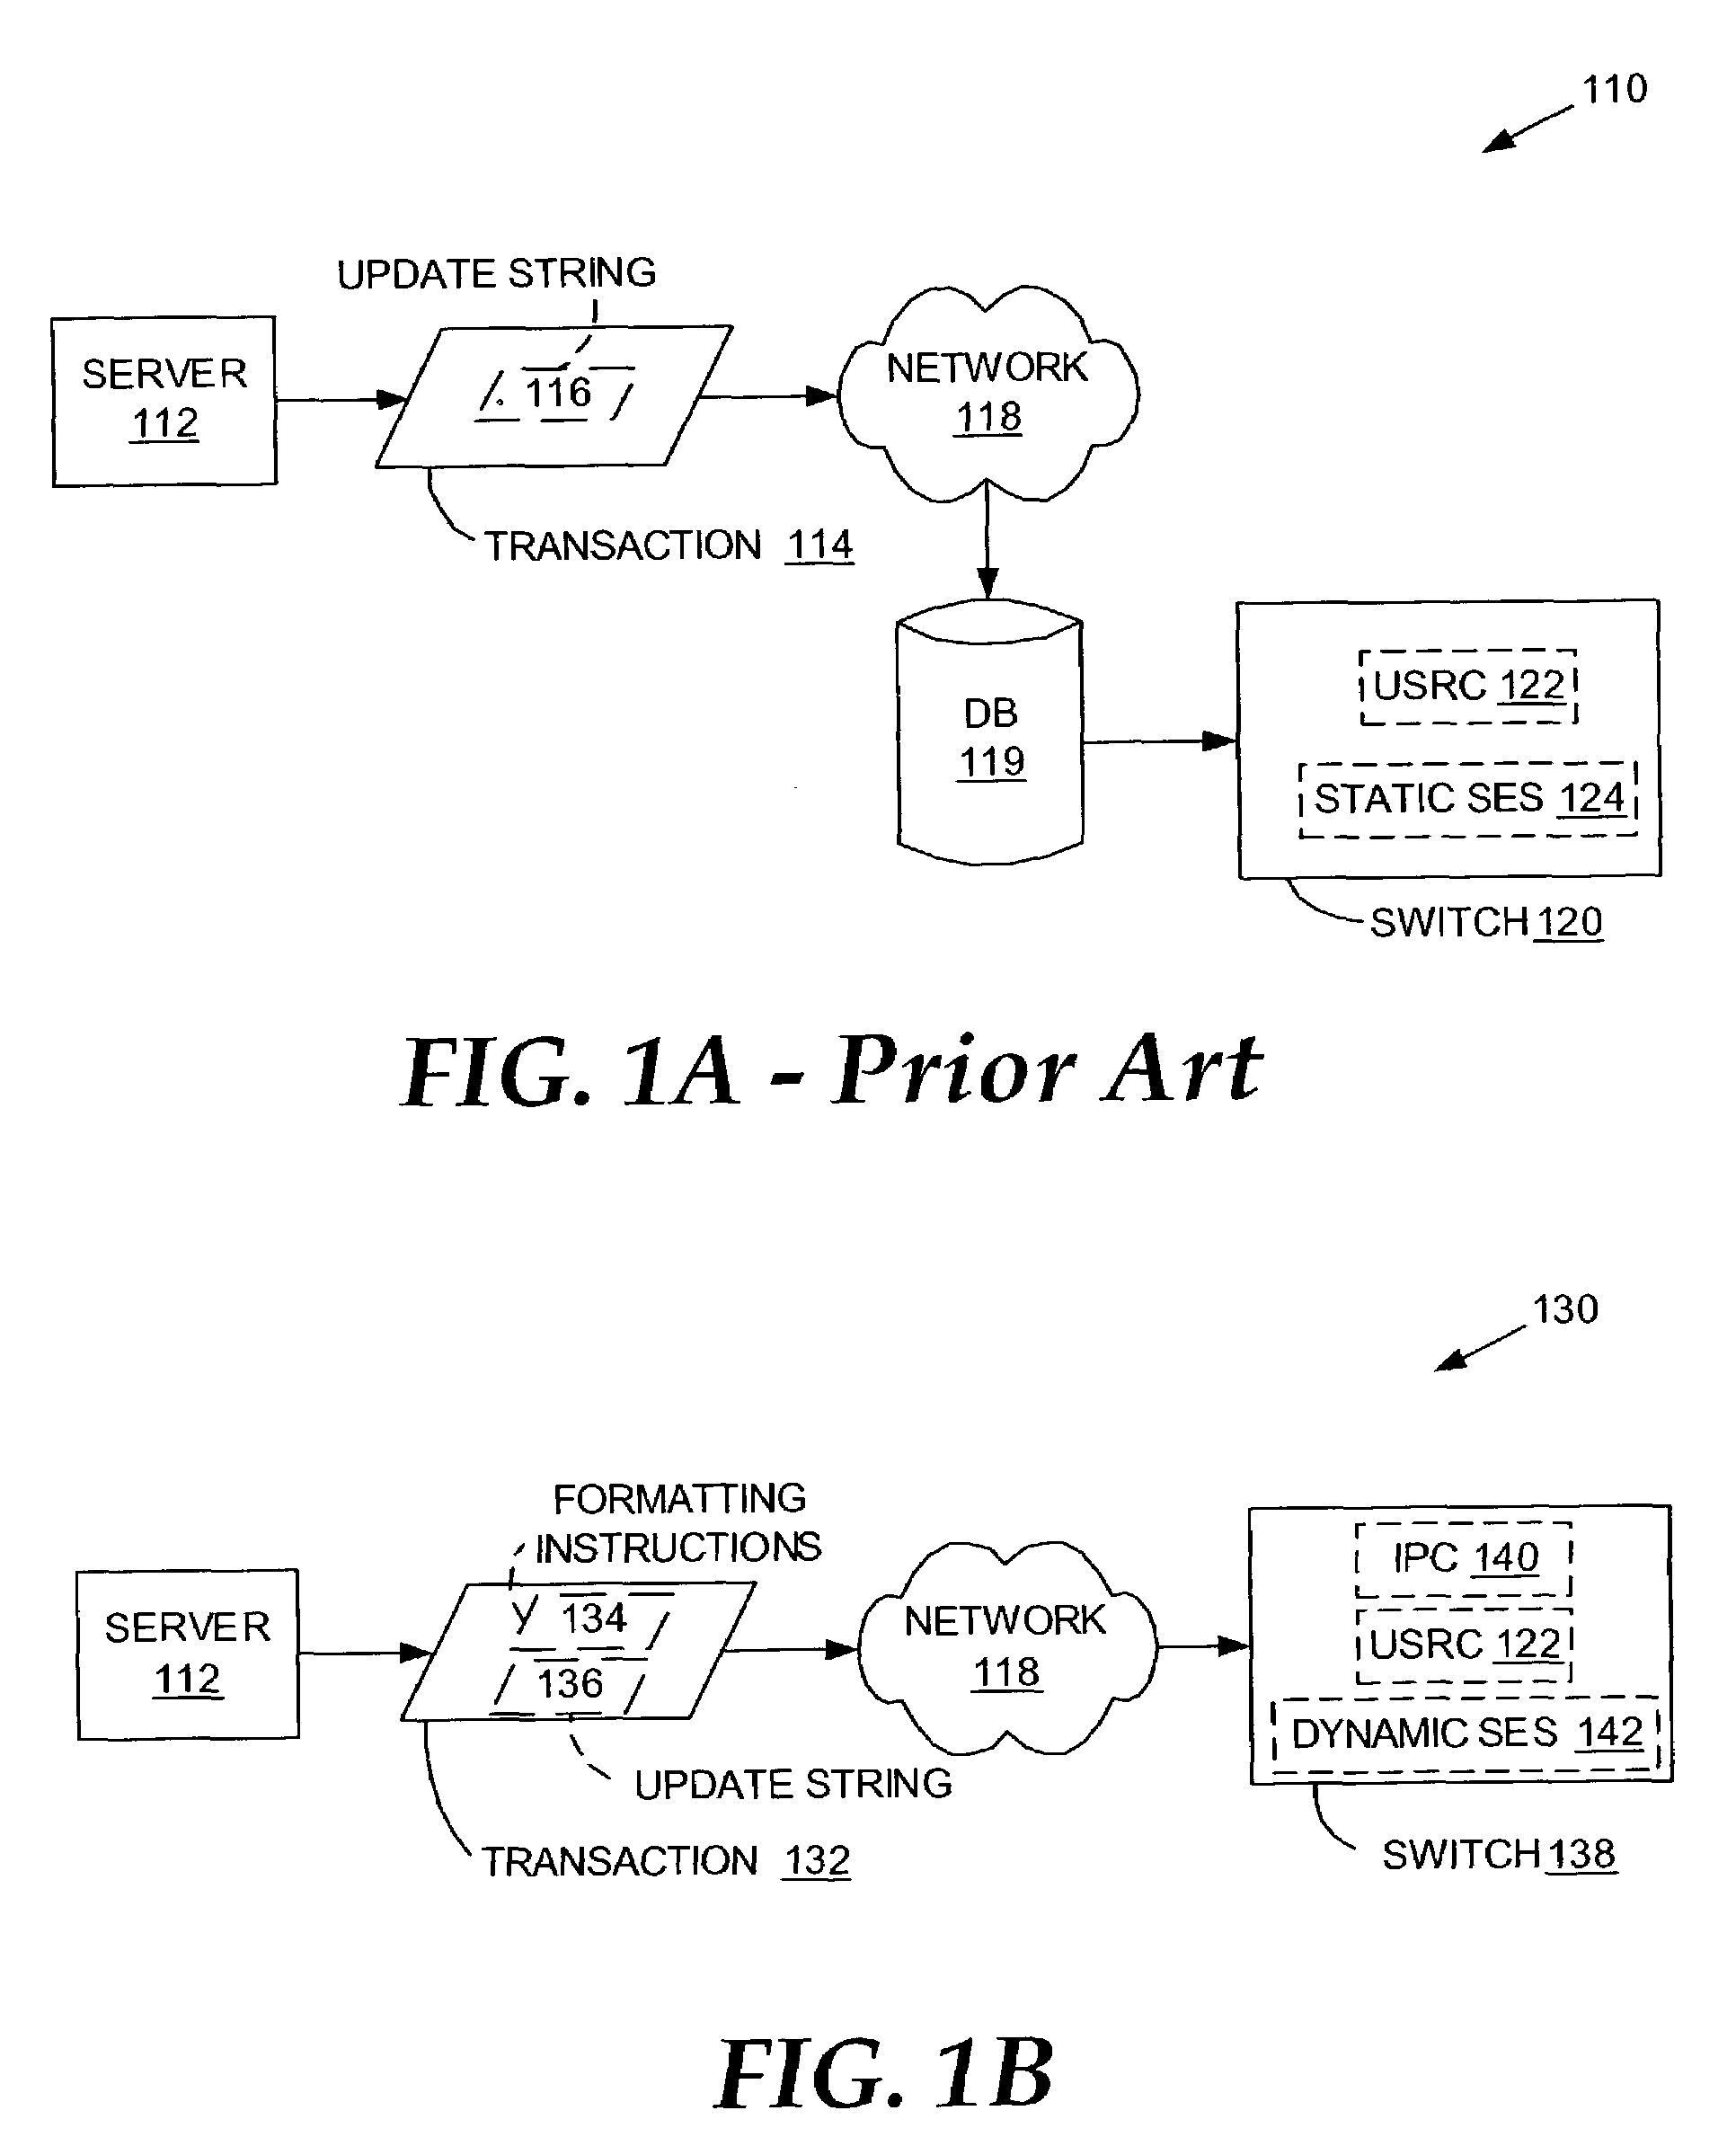 Method and system for customizing update-string processing in network elements